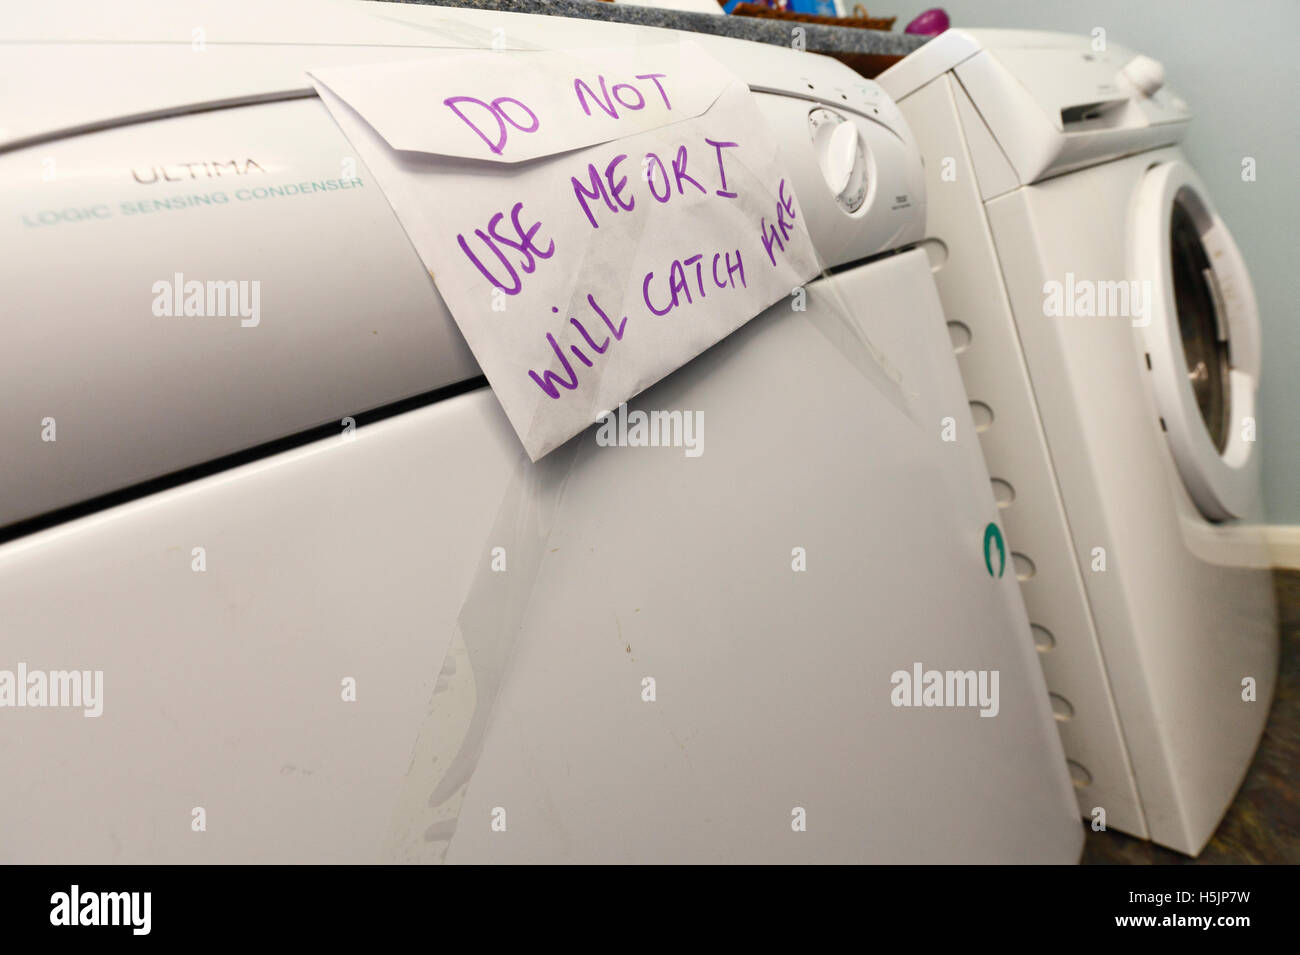 Faulty tumble drier with a warning sign not to use. Stock Photo